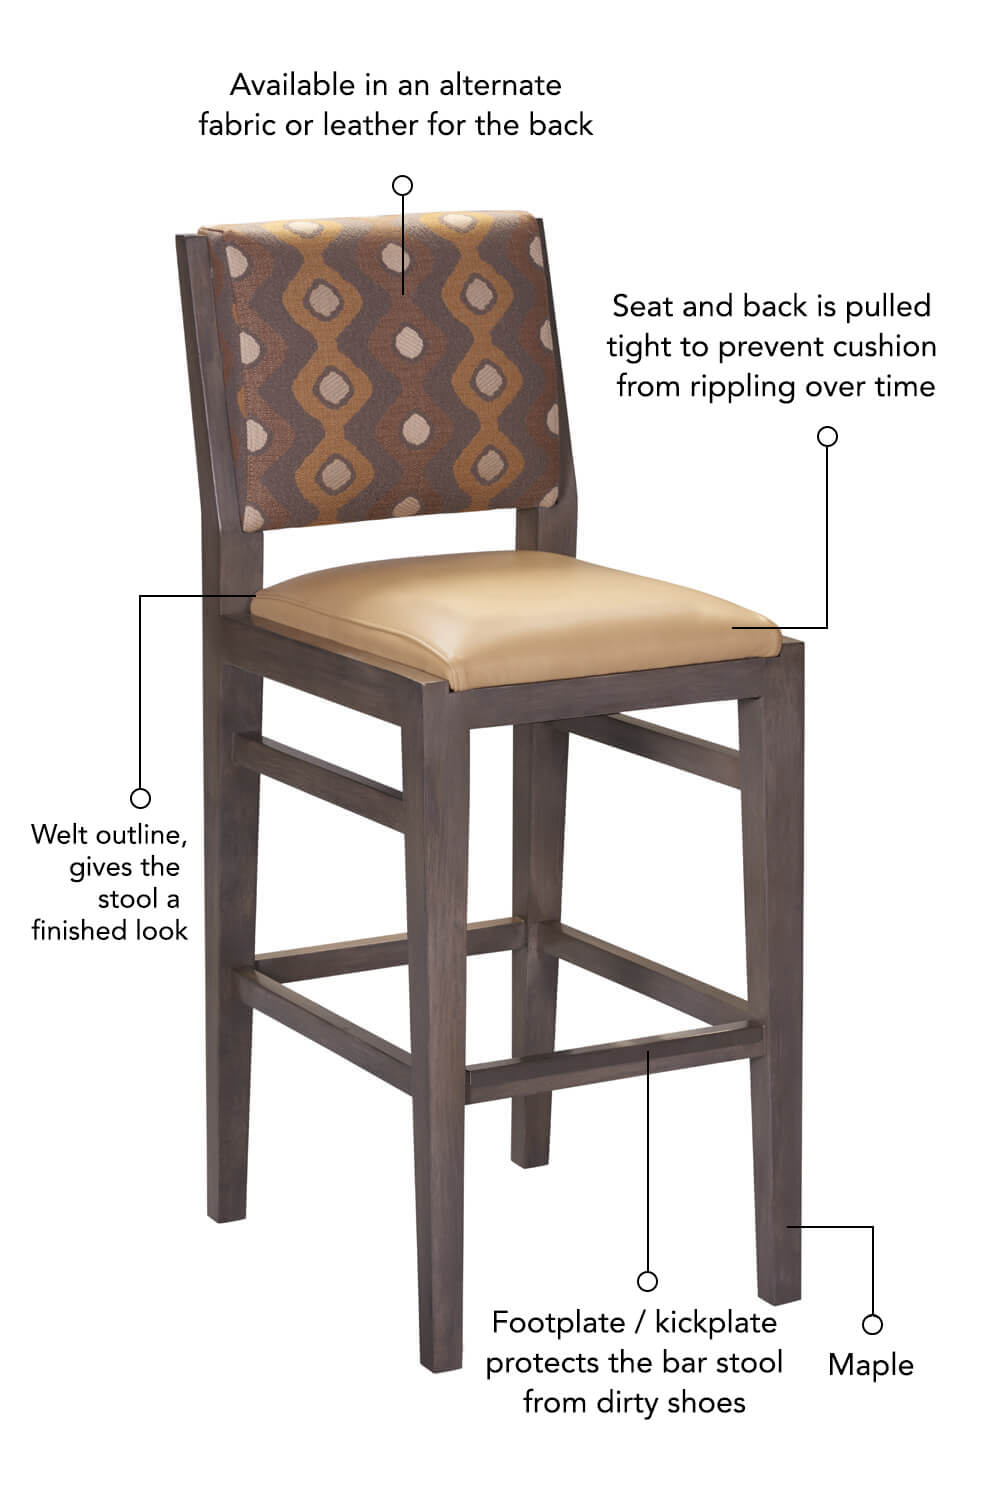 Seat is pulled tight to prevent cushion from rippling over time, includes an option to choose an alternate back cushion, and a maple base.